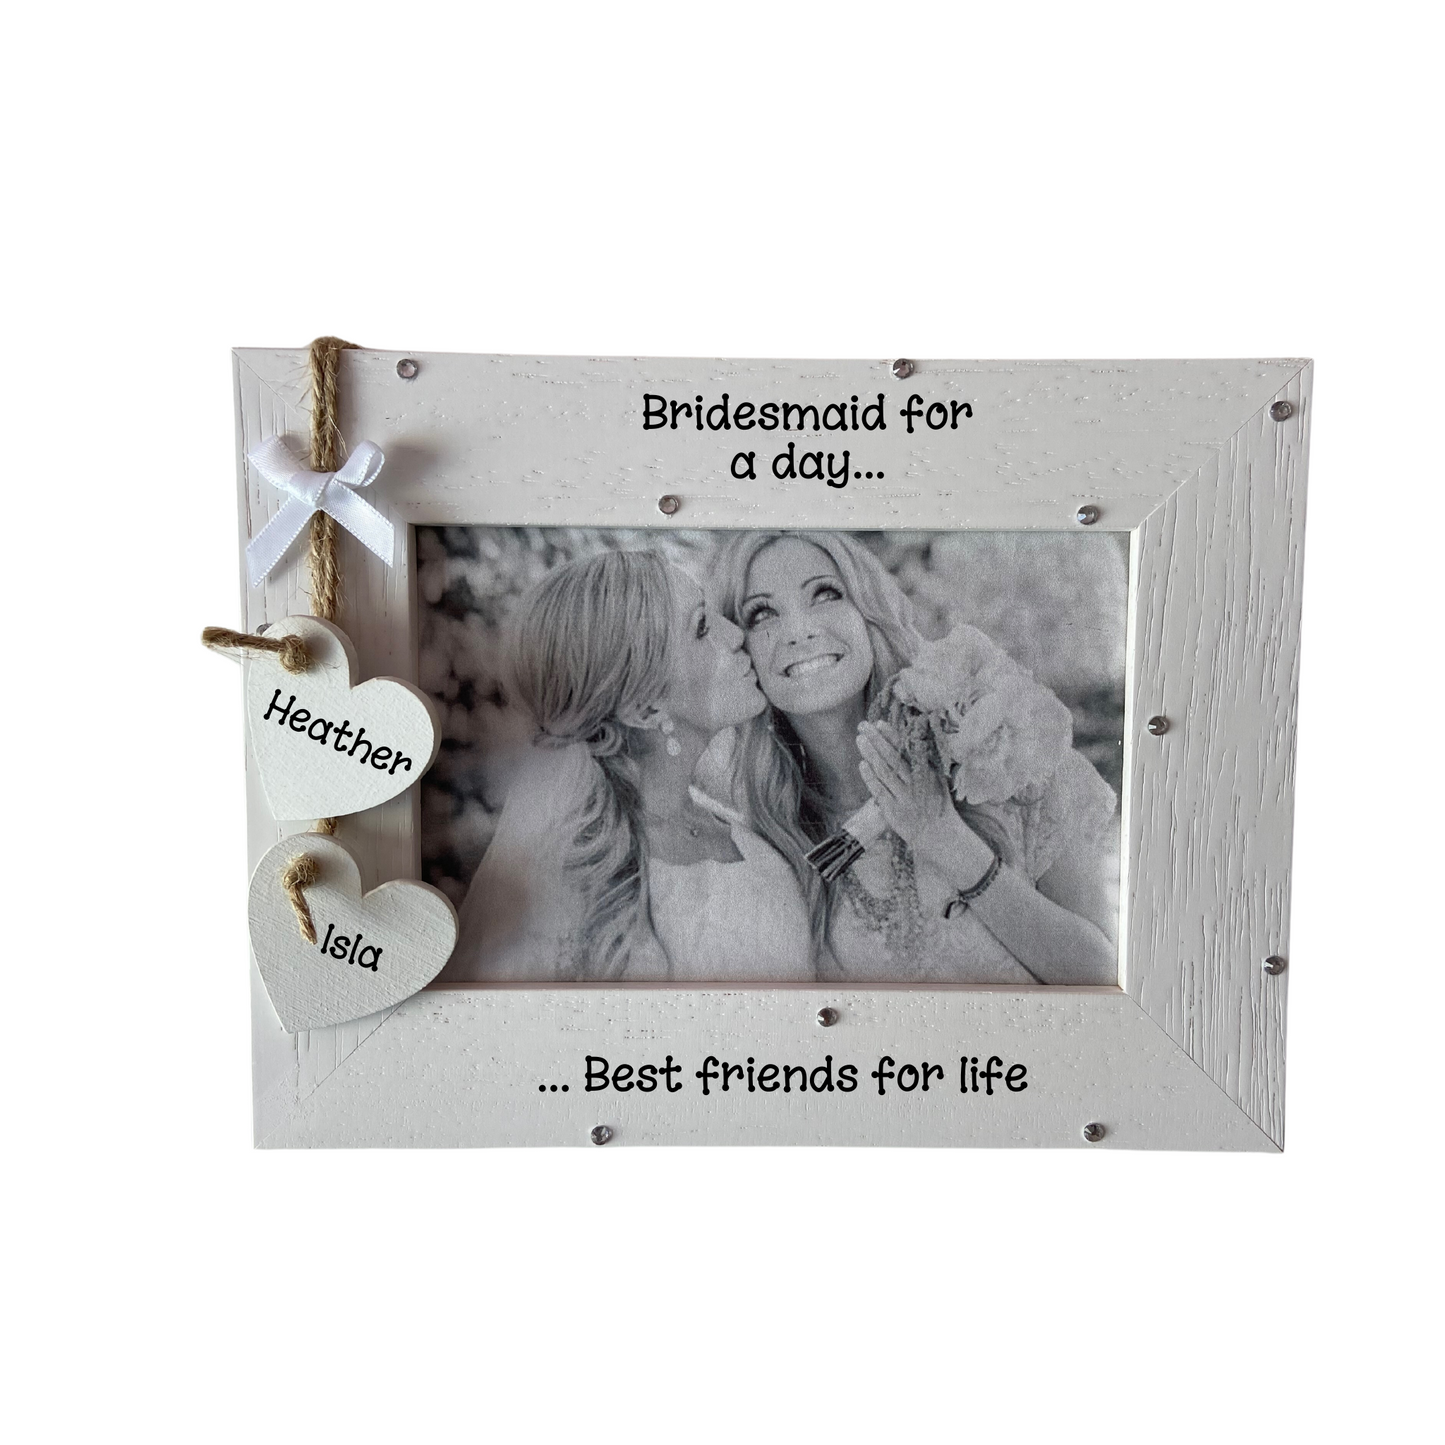 Image shows bride and bridesmaid frame, with two hanging hearts with names, also a small white bow above. Can also add bling if wanted.